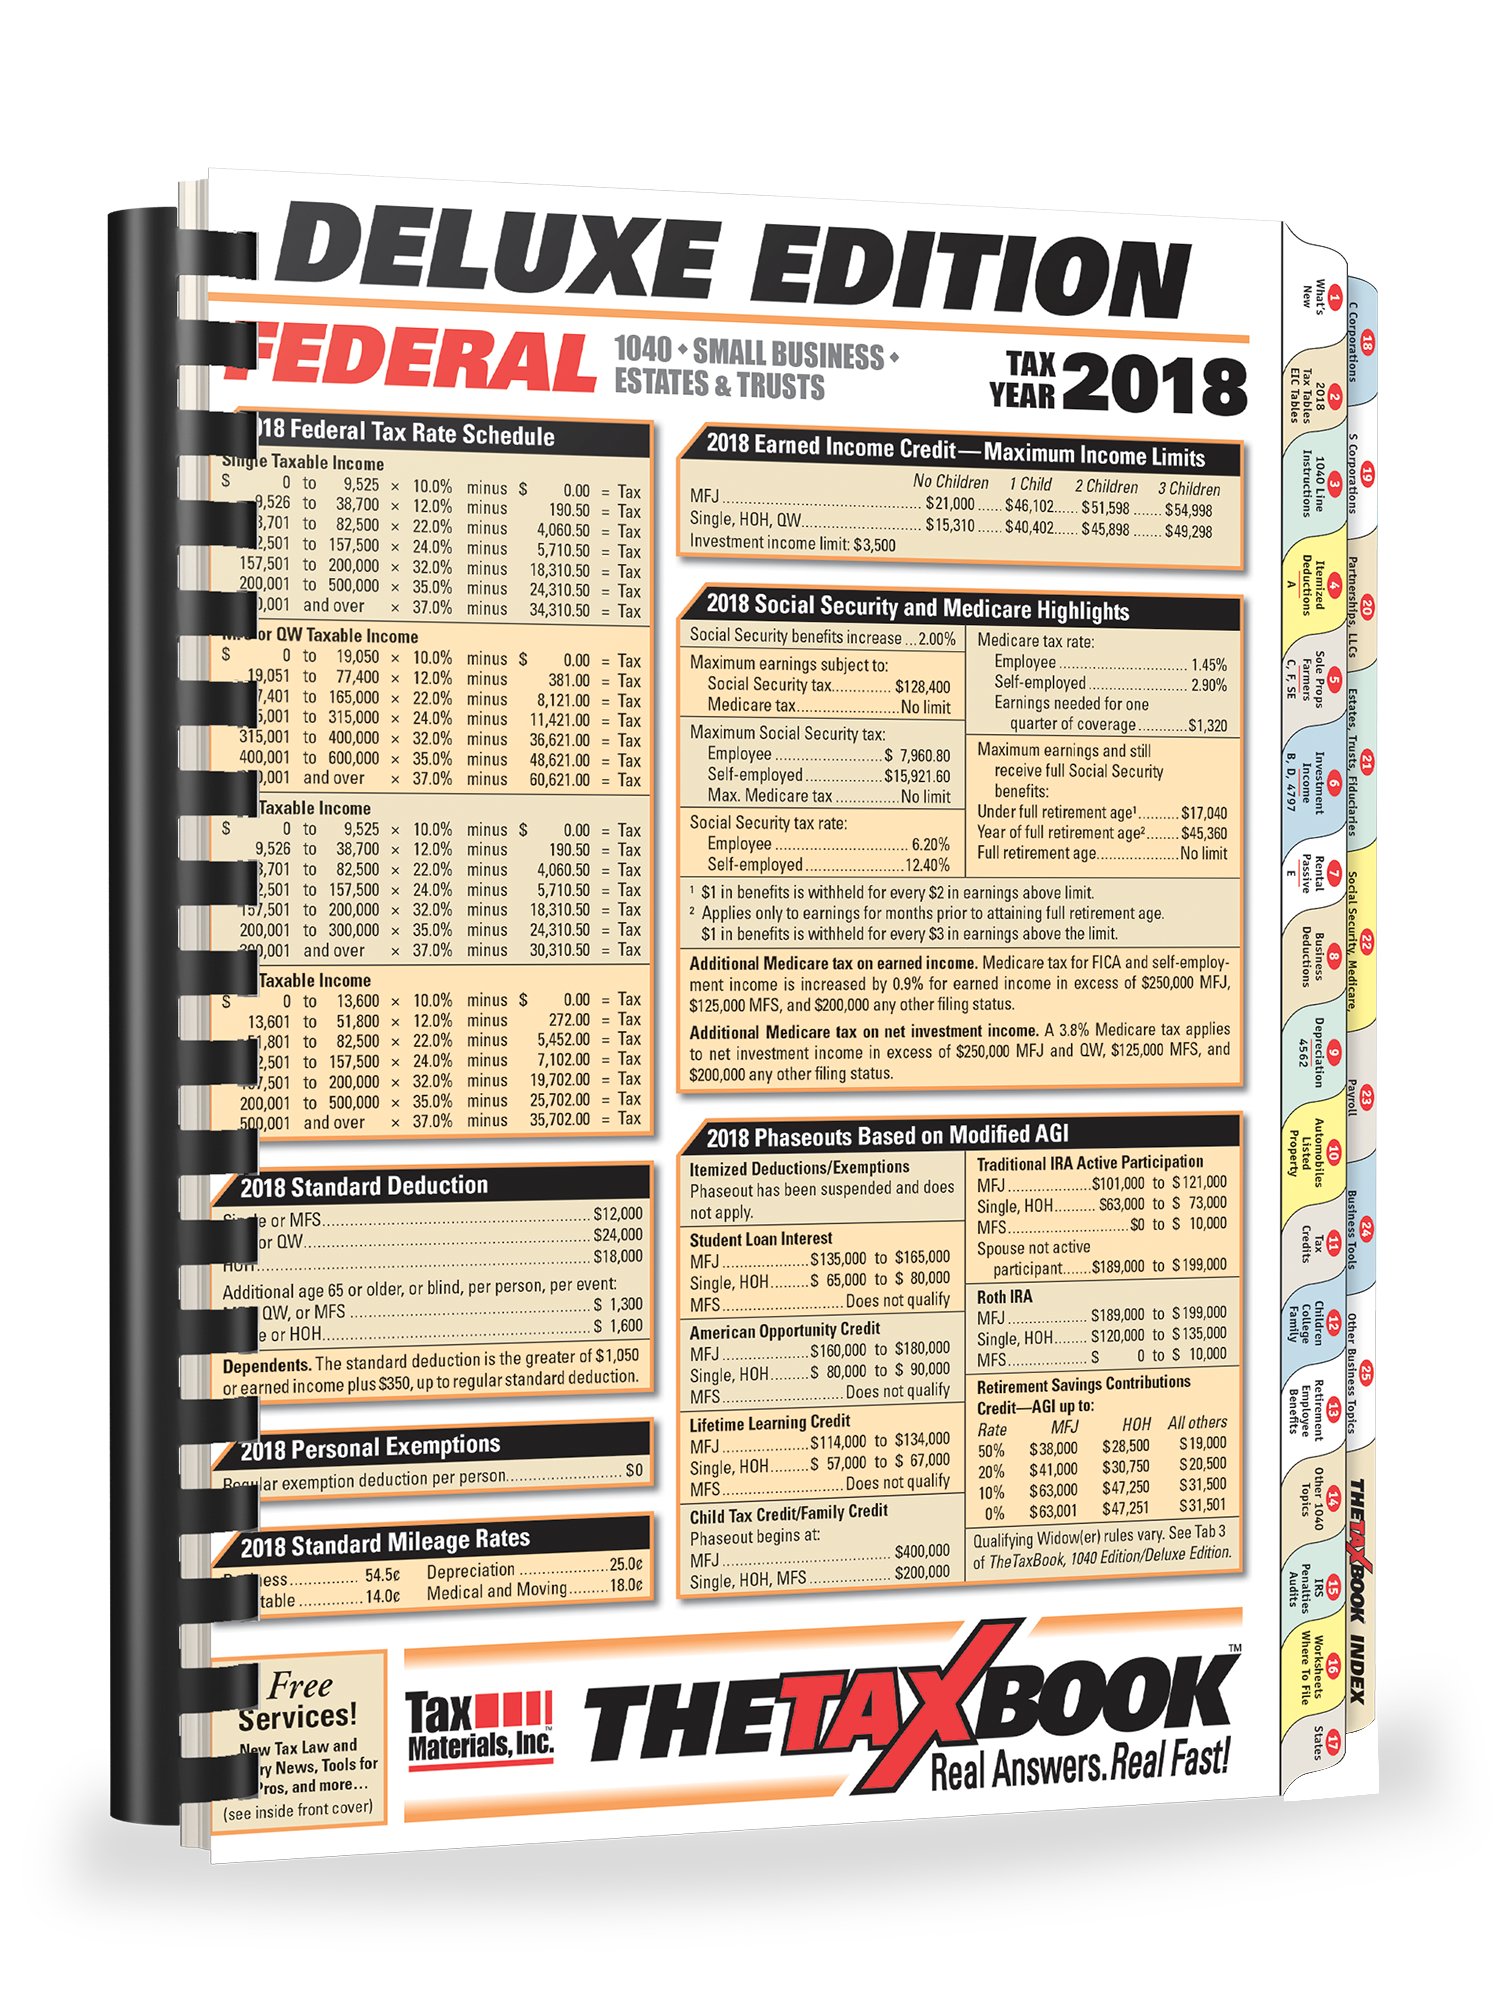 TheTaxBook Deluxe Edition Fast Answer Tax Book (2018) - #3882 